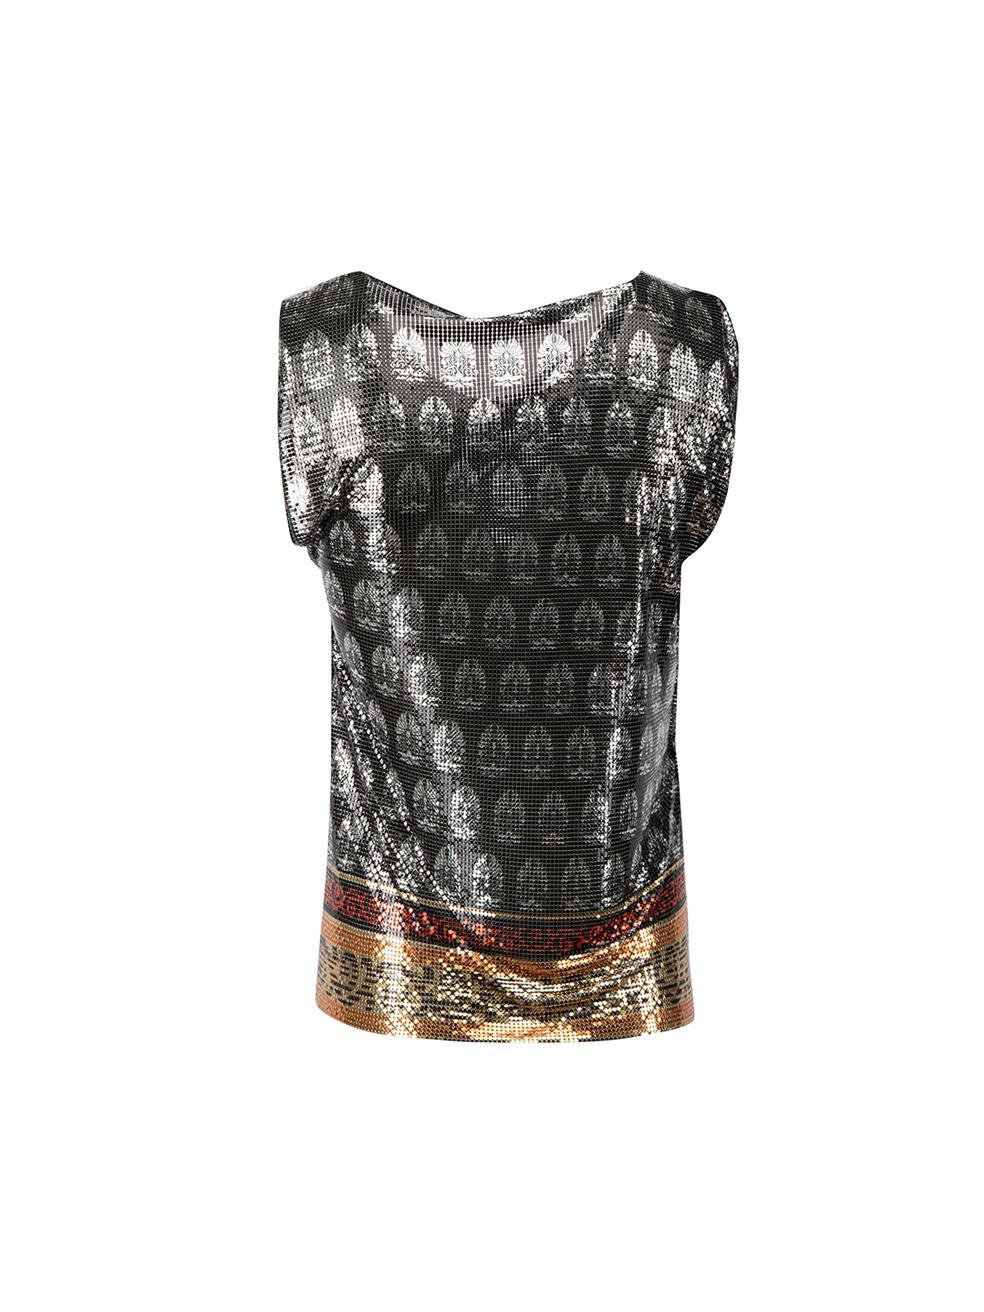 Paco Rabanne Women's Metallic Patterned Chainmail Top In New Condition For Sale In London, GB